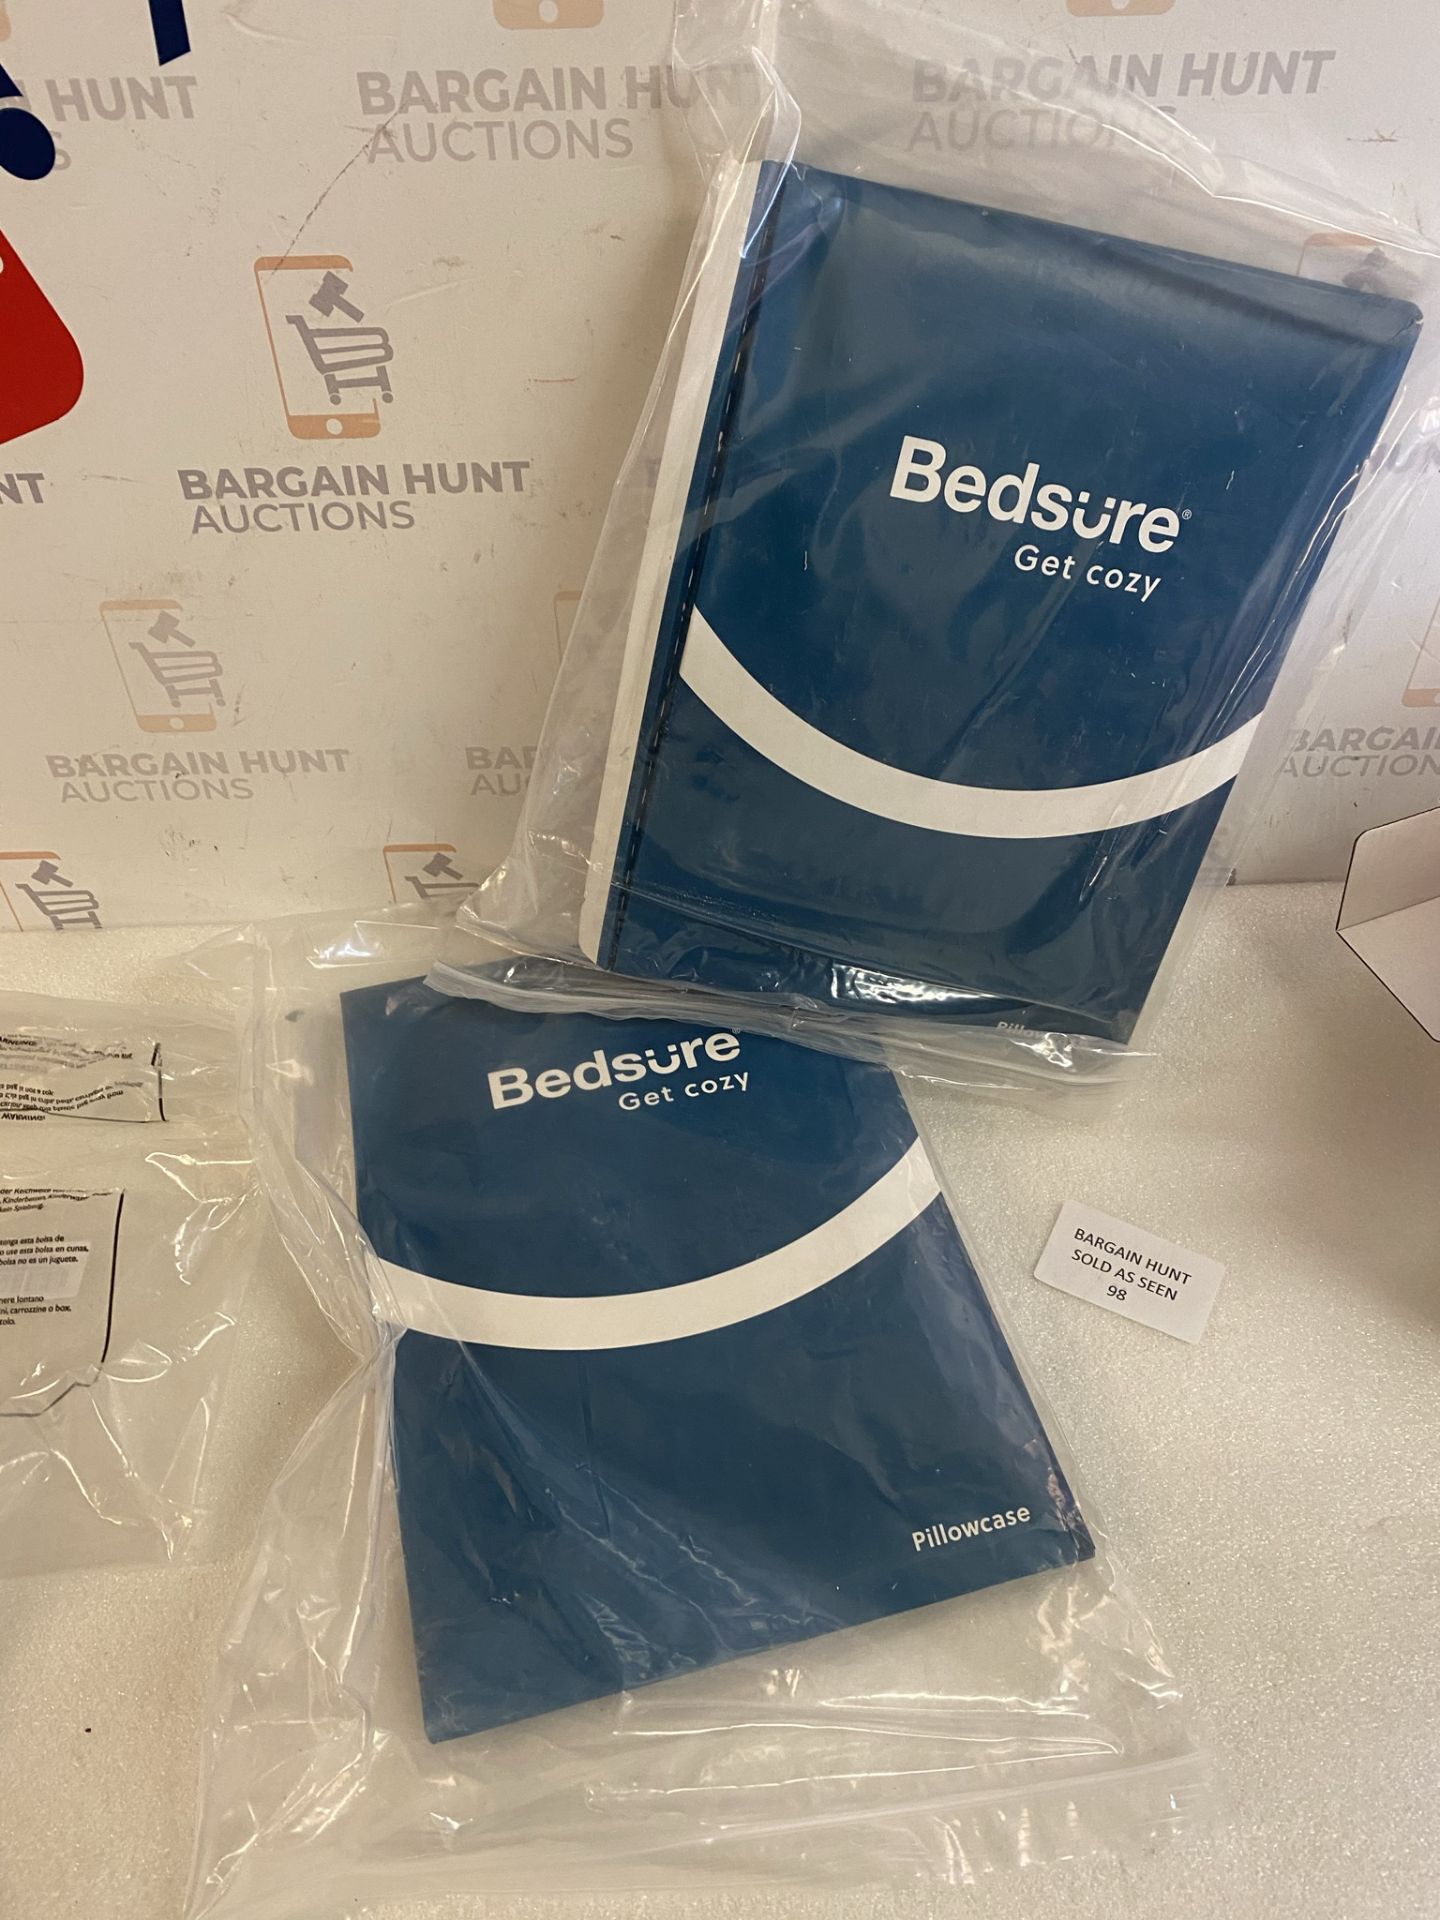 Besure Brushed Microfibre Pillow Cases, 2 packs of 4 - Image 2 of 2